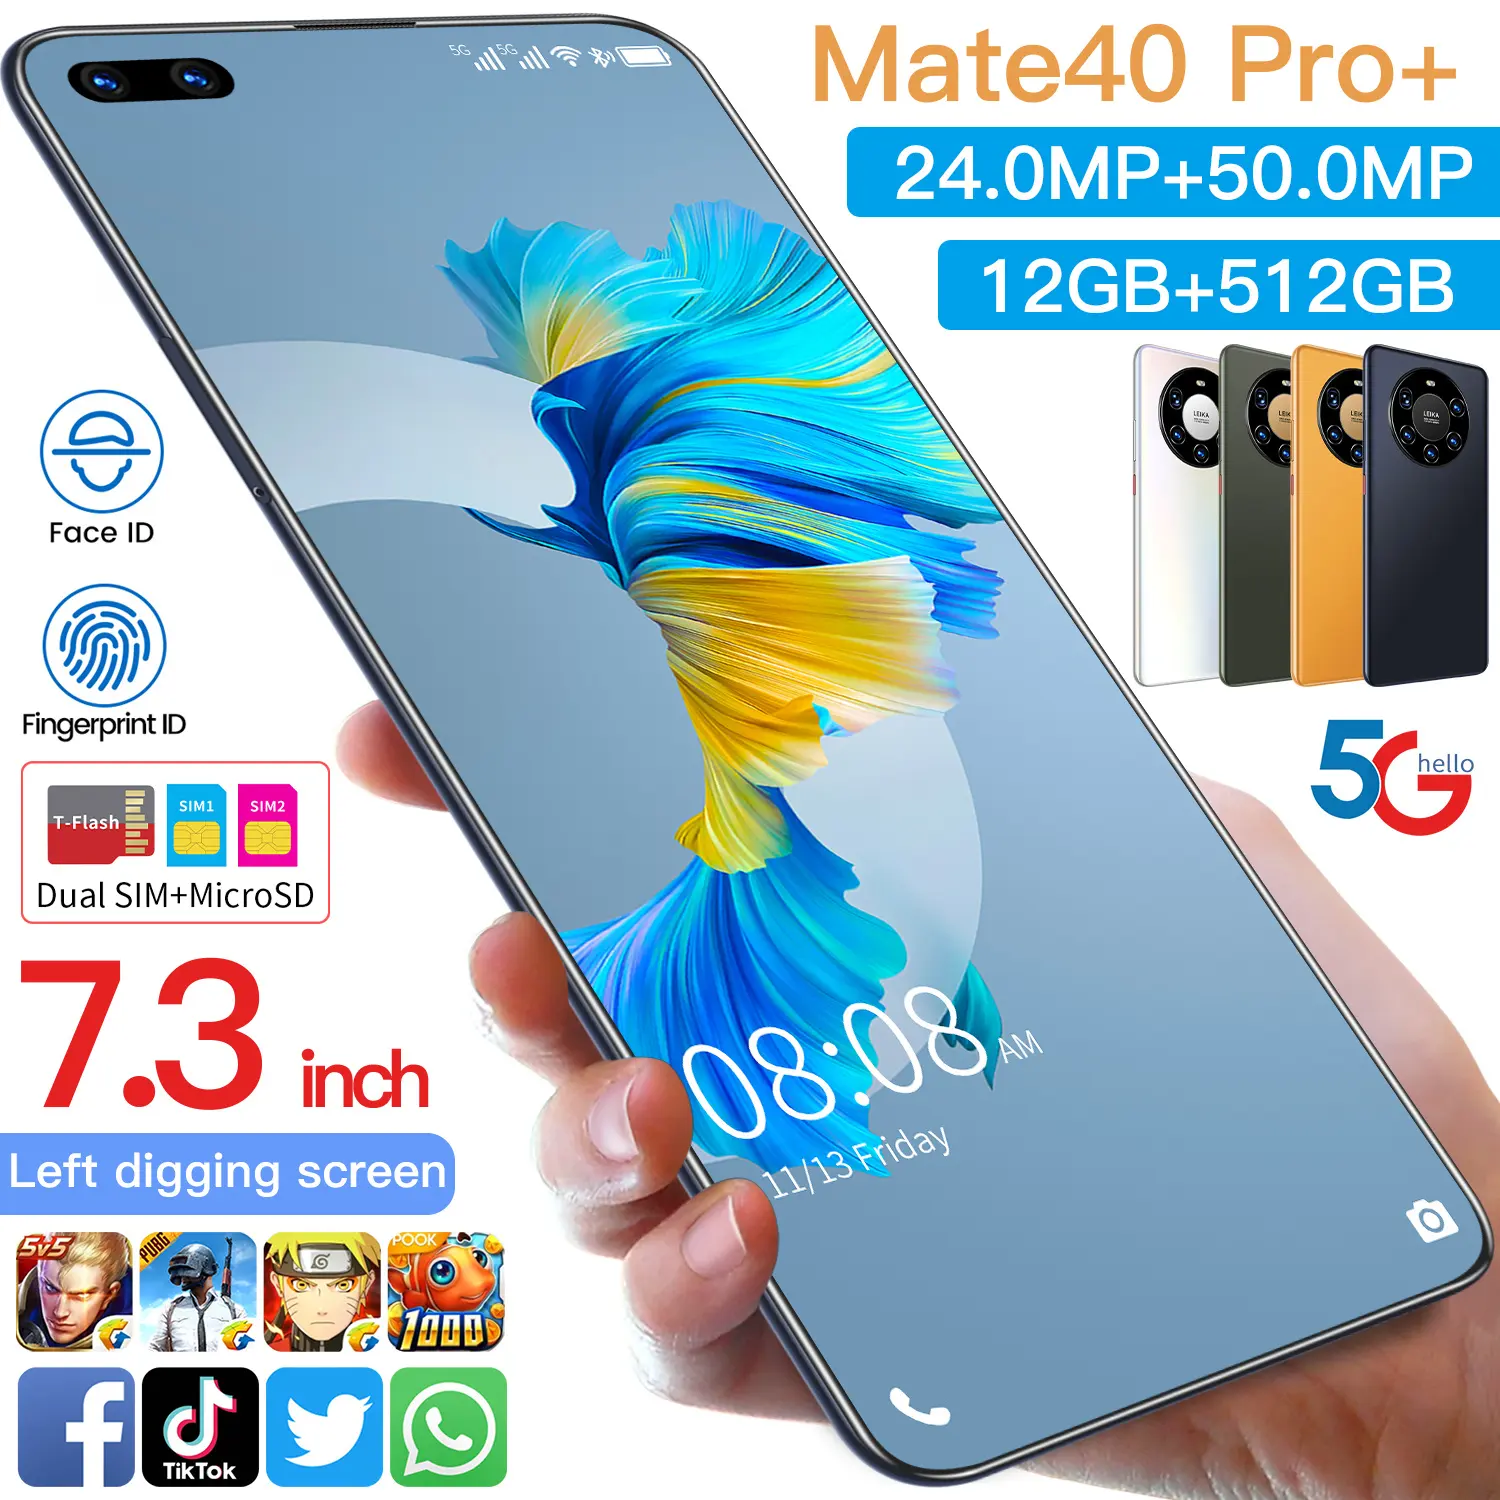 2022 Hot Selling Mate 40 Pro+ Mate 50 12gb+512gb 7.3 Inch Full Display Android 10.0 Mobile Cell Smart Phone